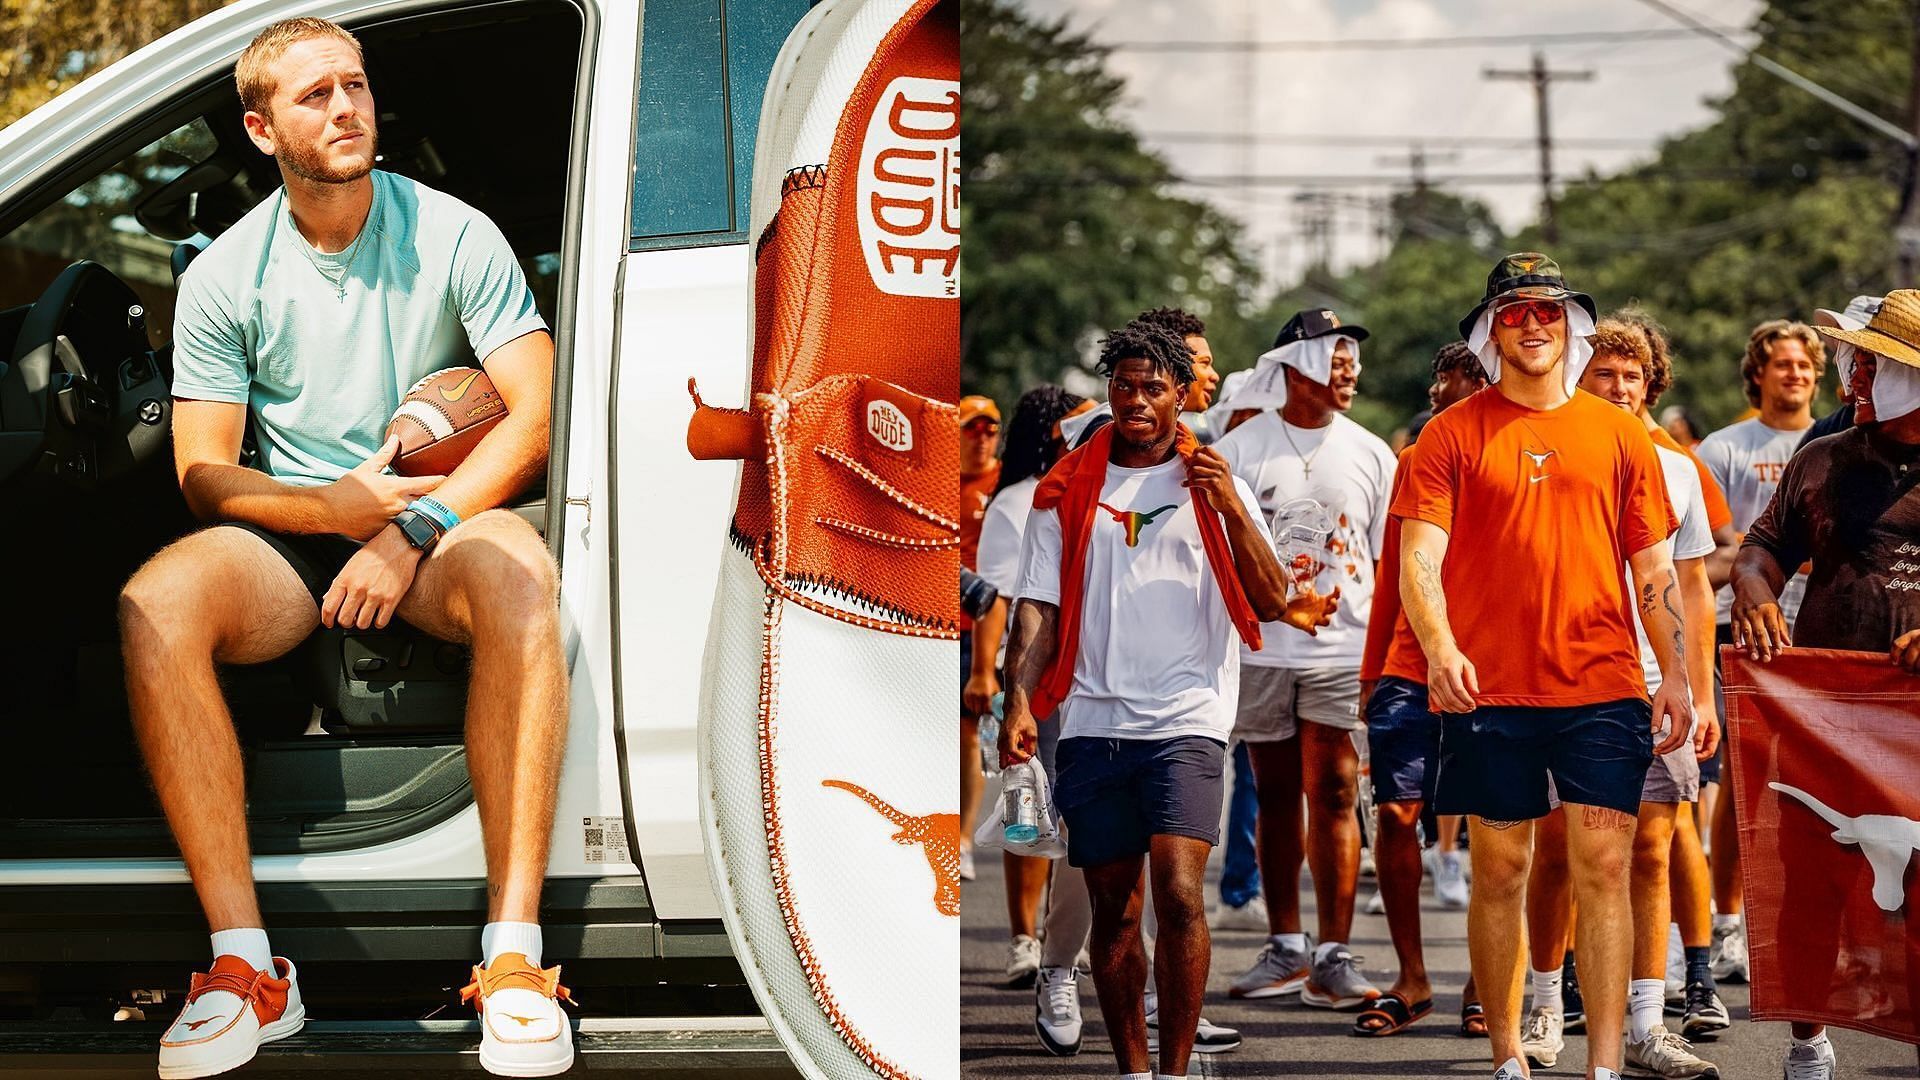 Quinn Ewers on relationship with the new Longhorns (Images via @Quinn_ewers @texasfootball